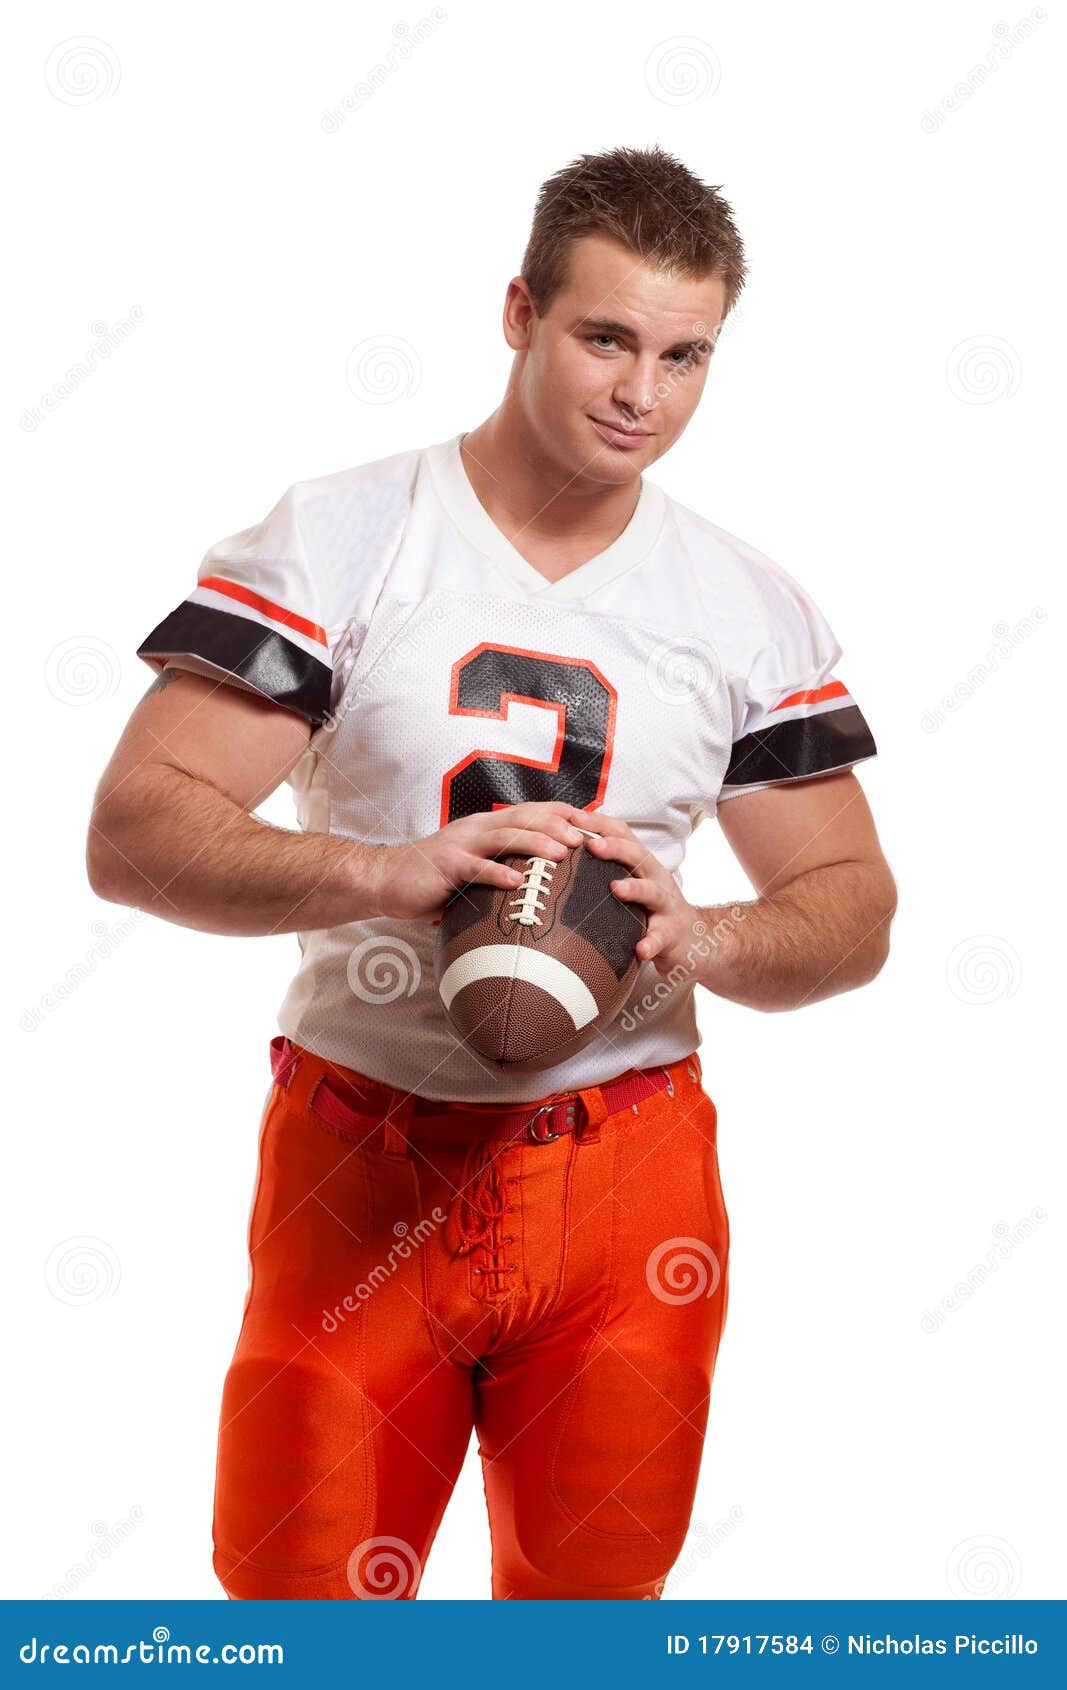 Football Player stock photo. Image of athletic, male - 17917584